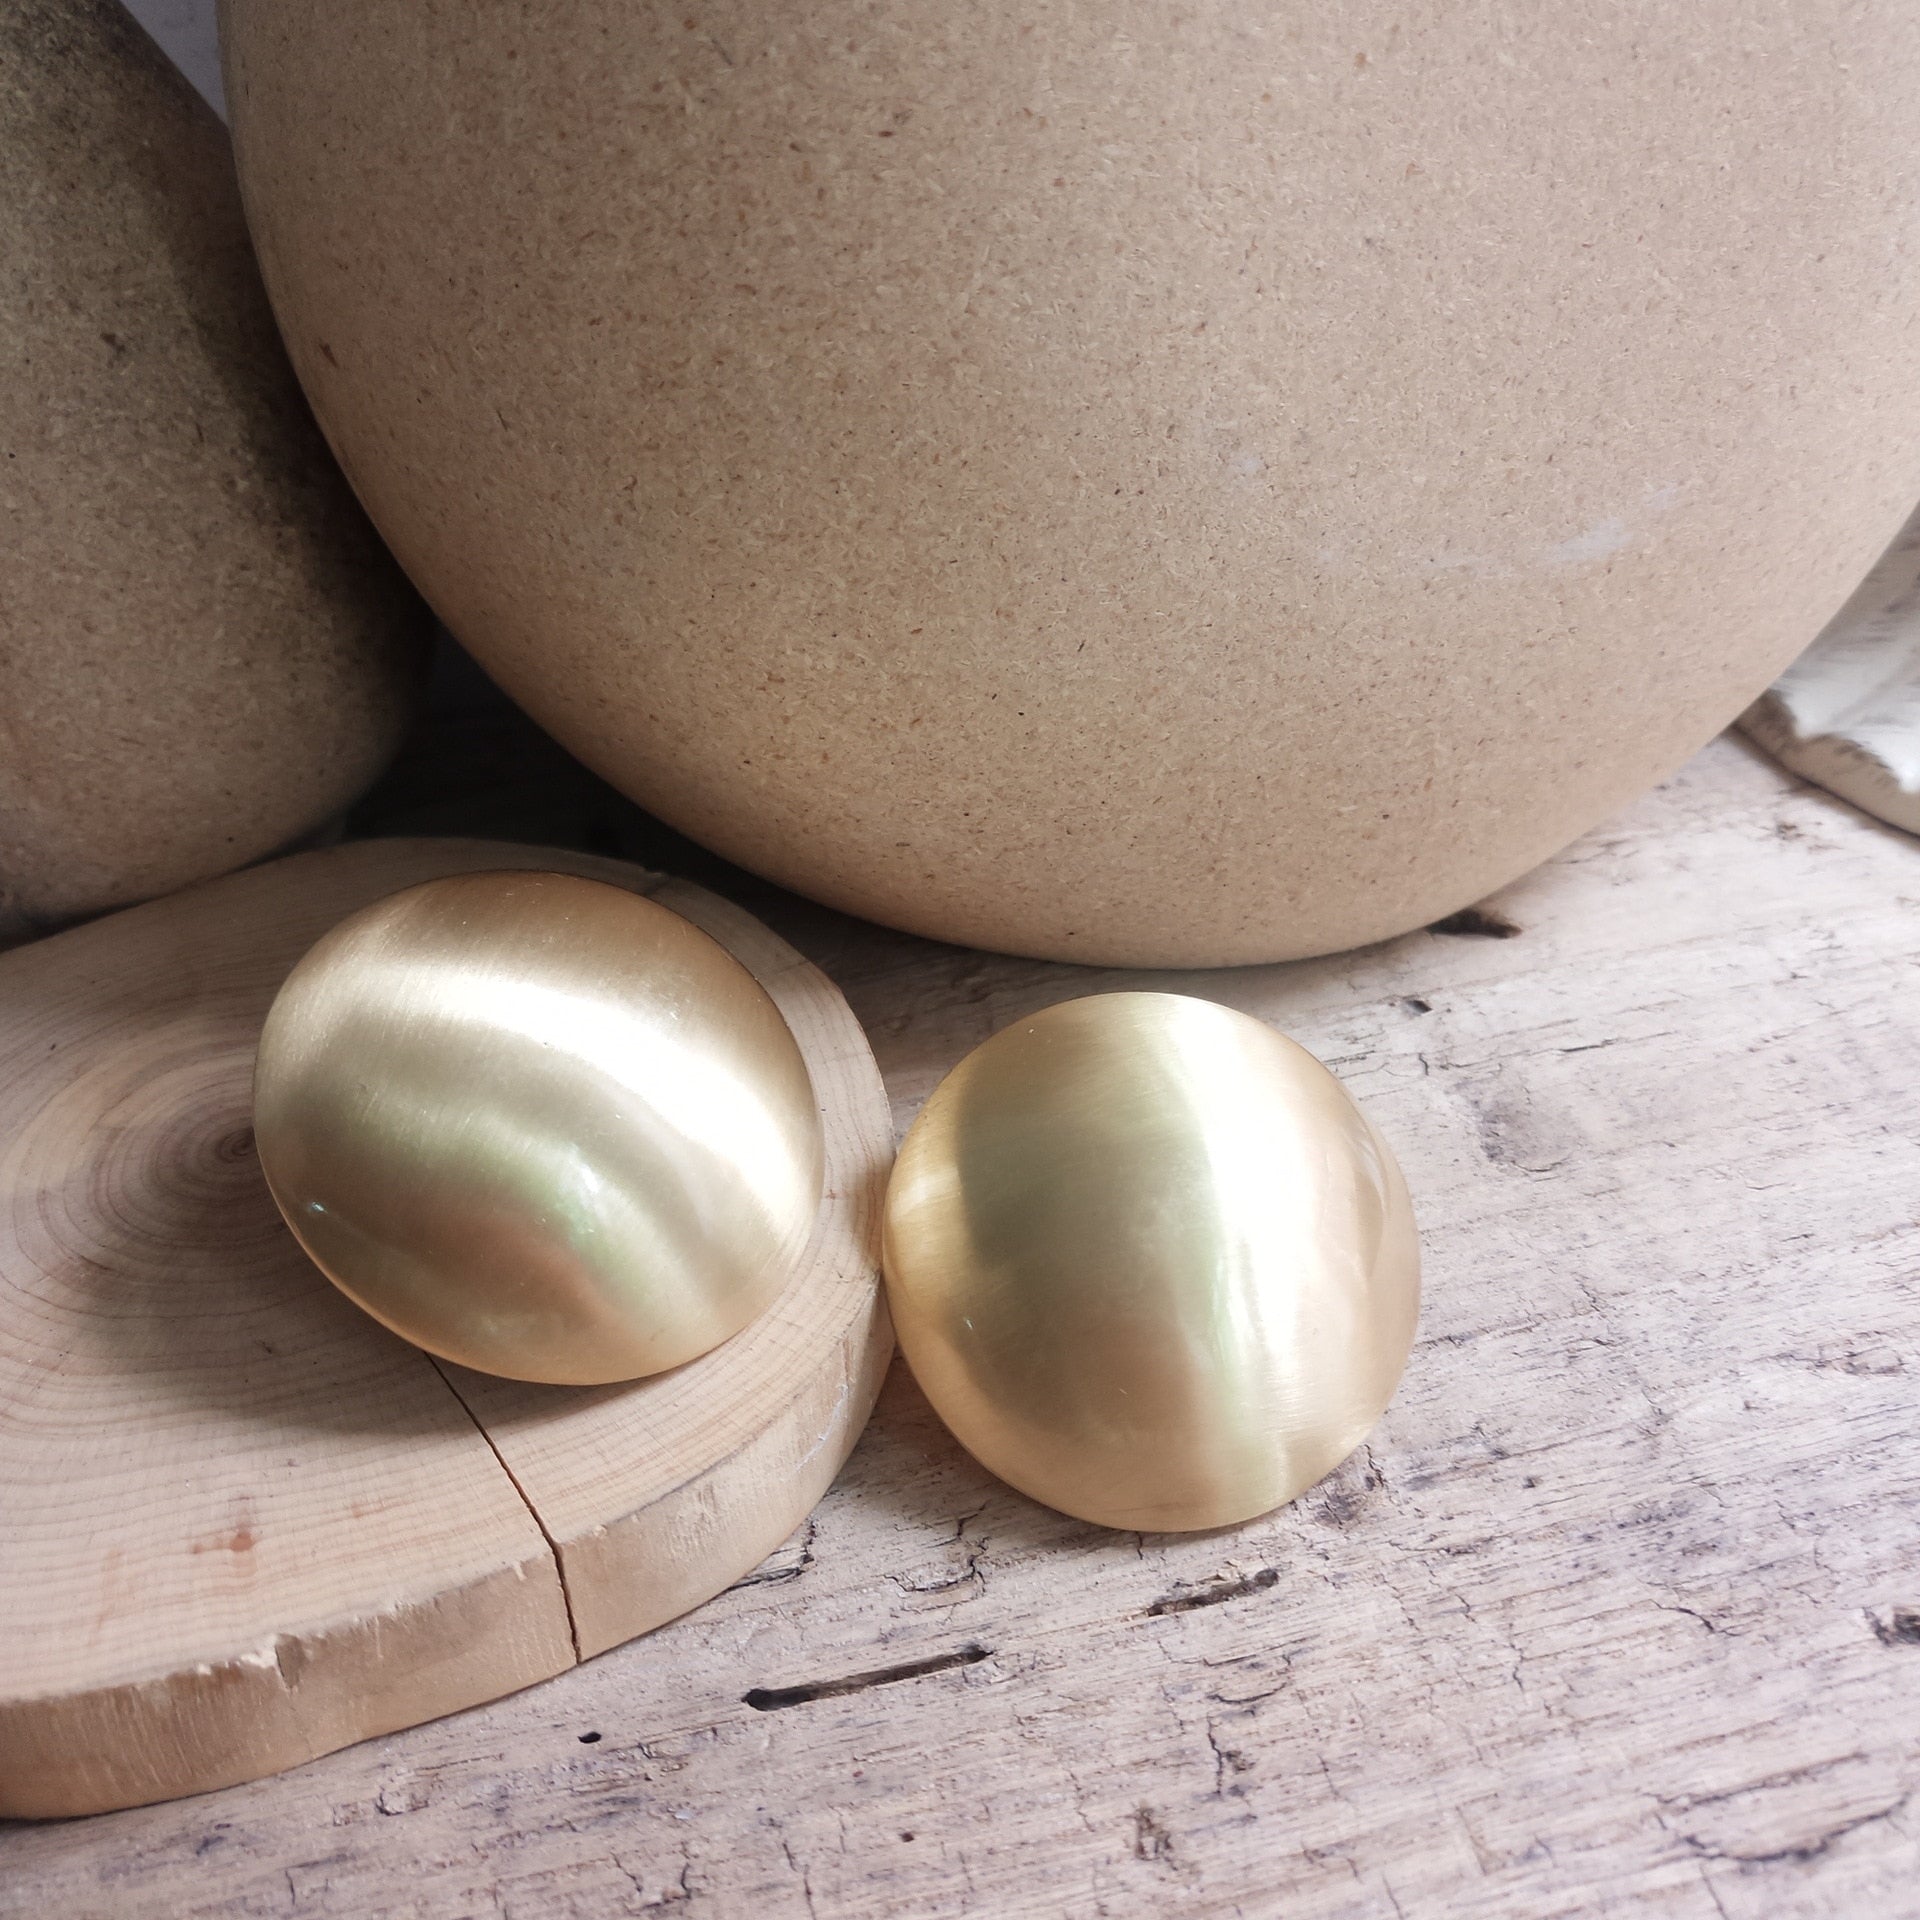 Big Round Gold Earrings